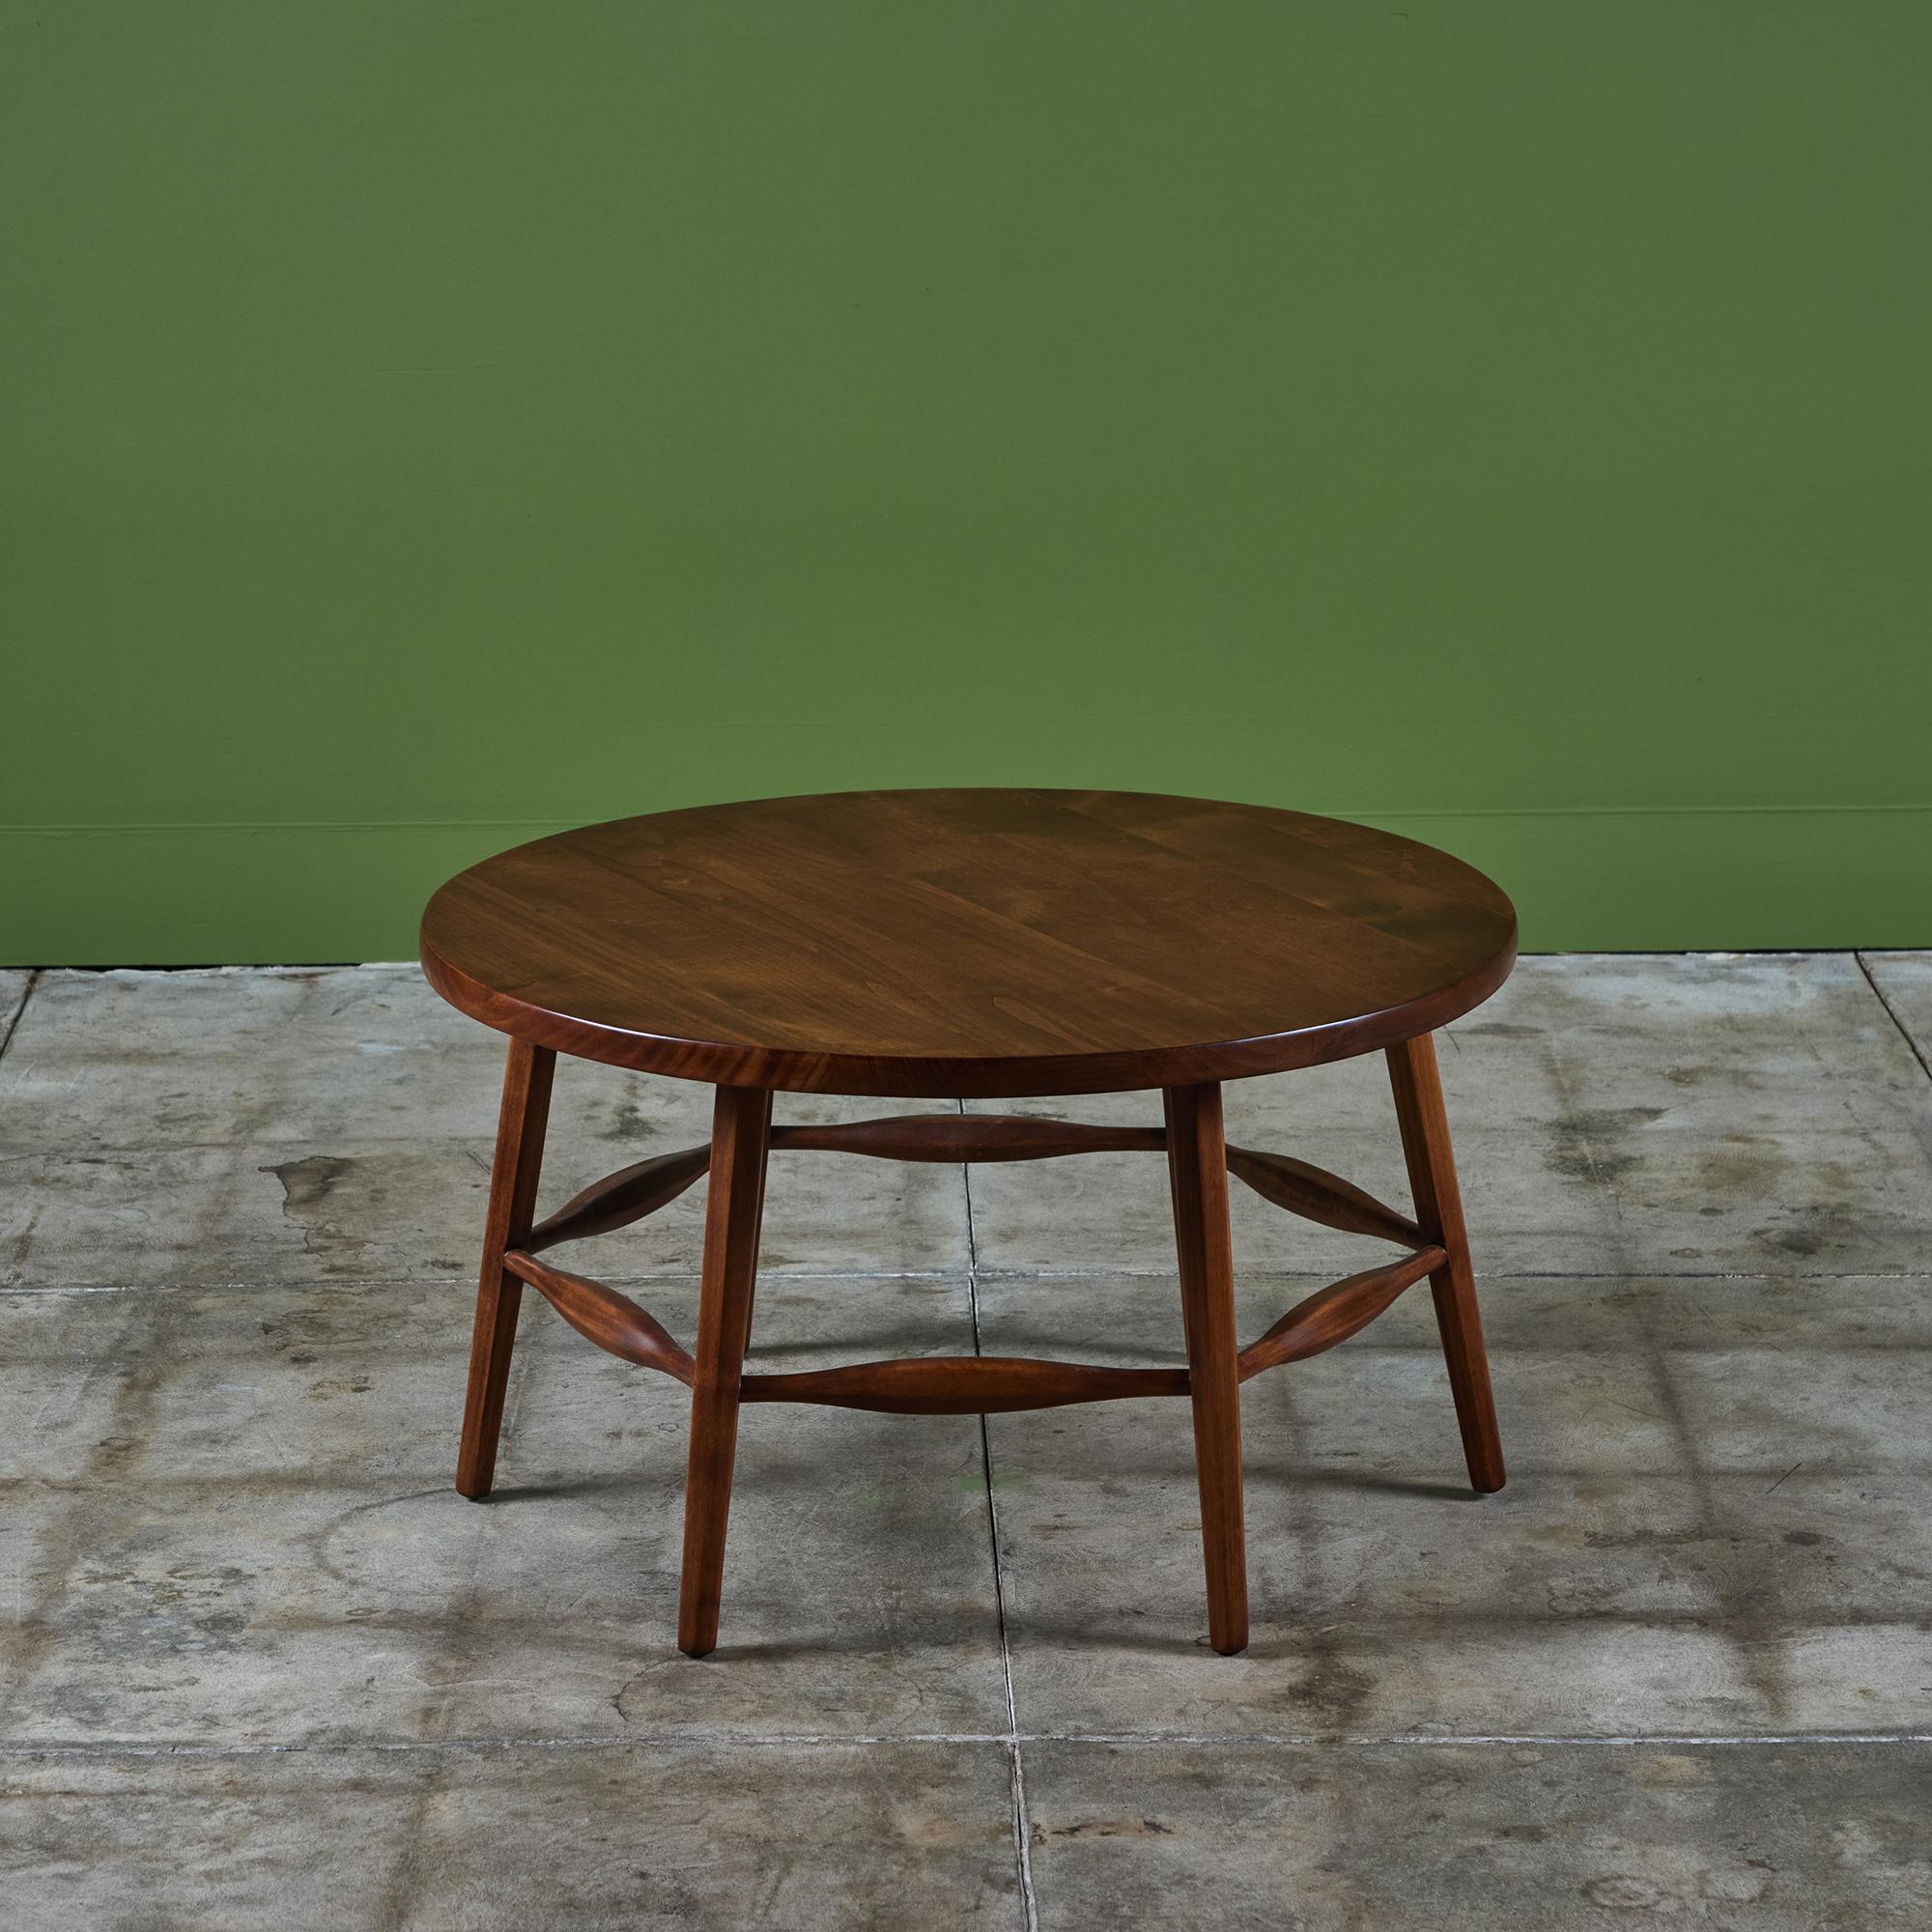 Monterey round coffee table c.1930s, USA. This example, produced during the Monterey period in California is finished in a dark walnut stain and features six splayed legs all connected by stretchers.

Dimensions
31.5